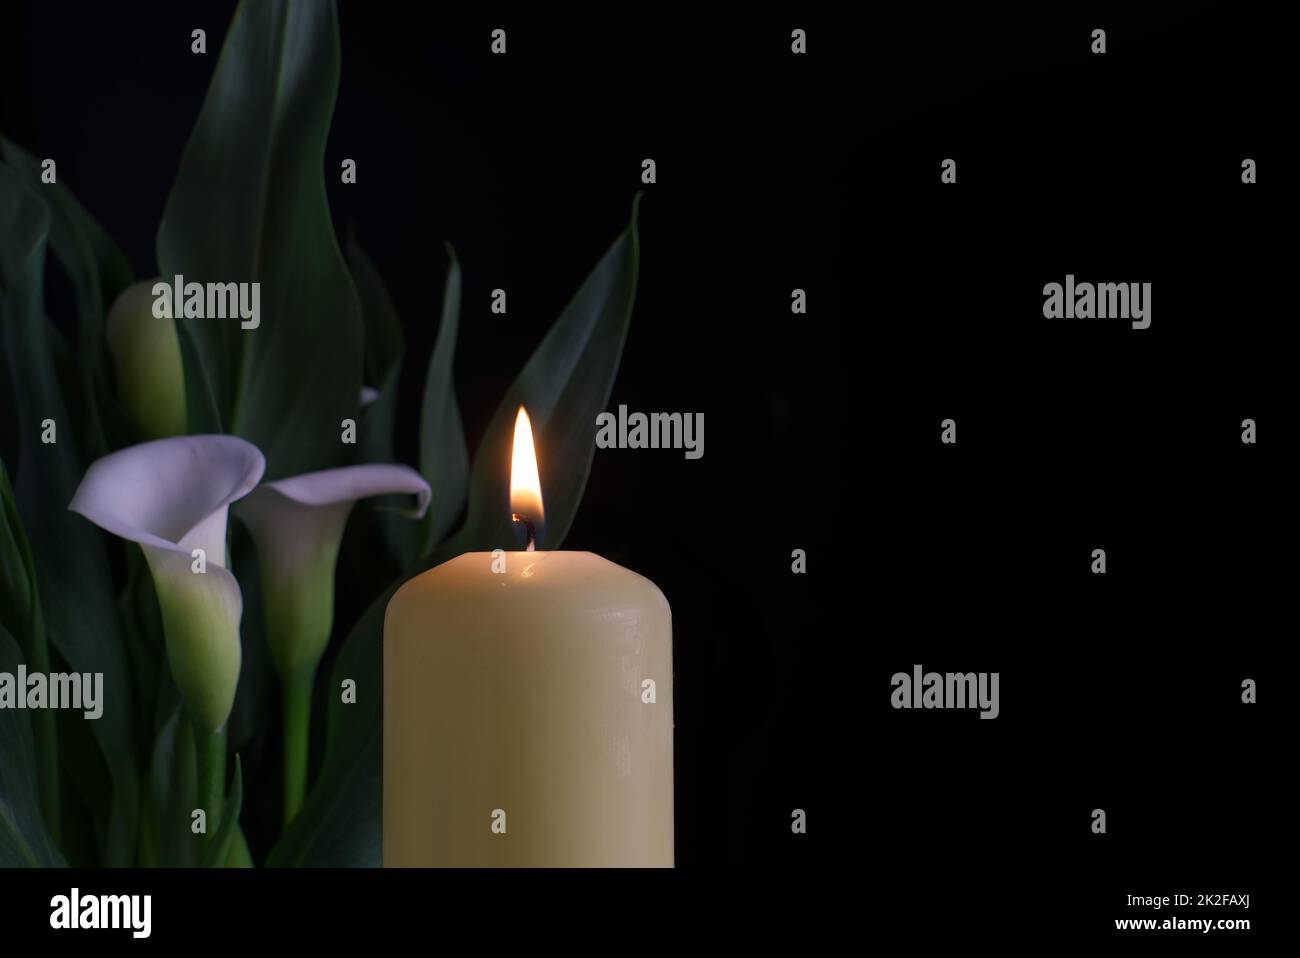 Candle burning flame in the darkness and arum lilies Stock Photo